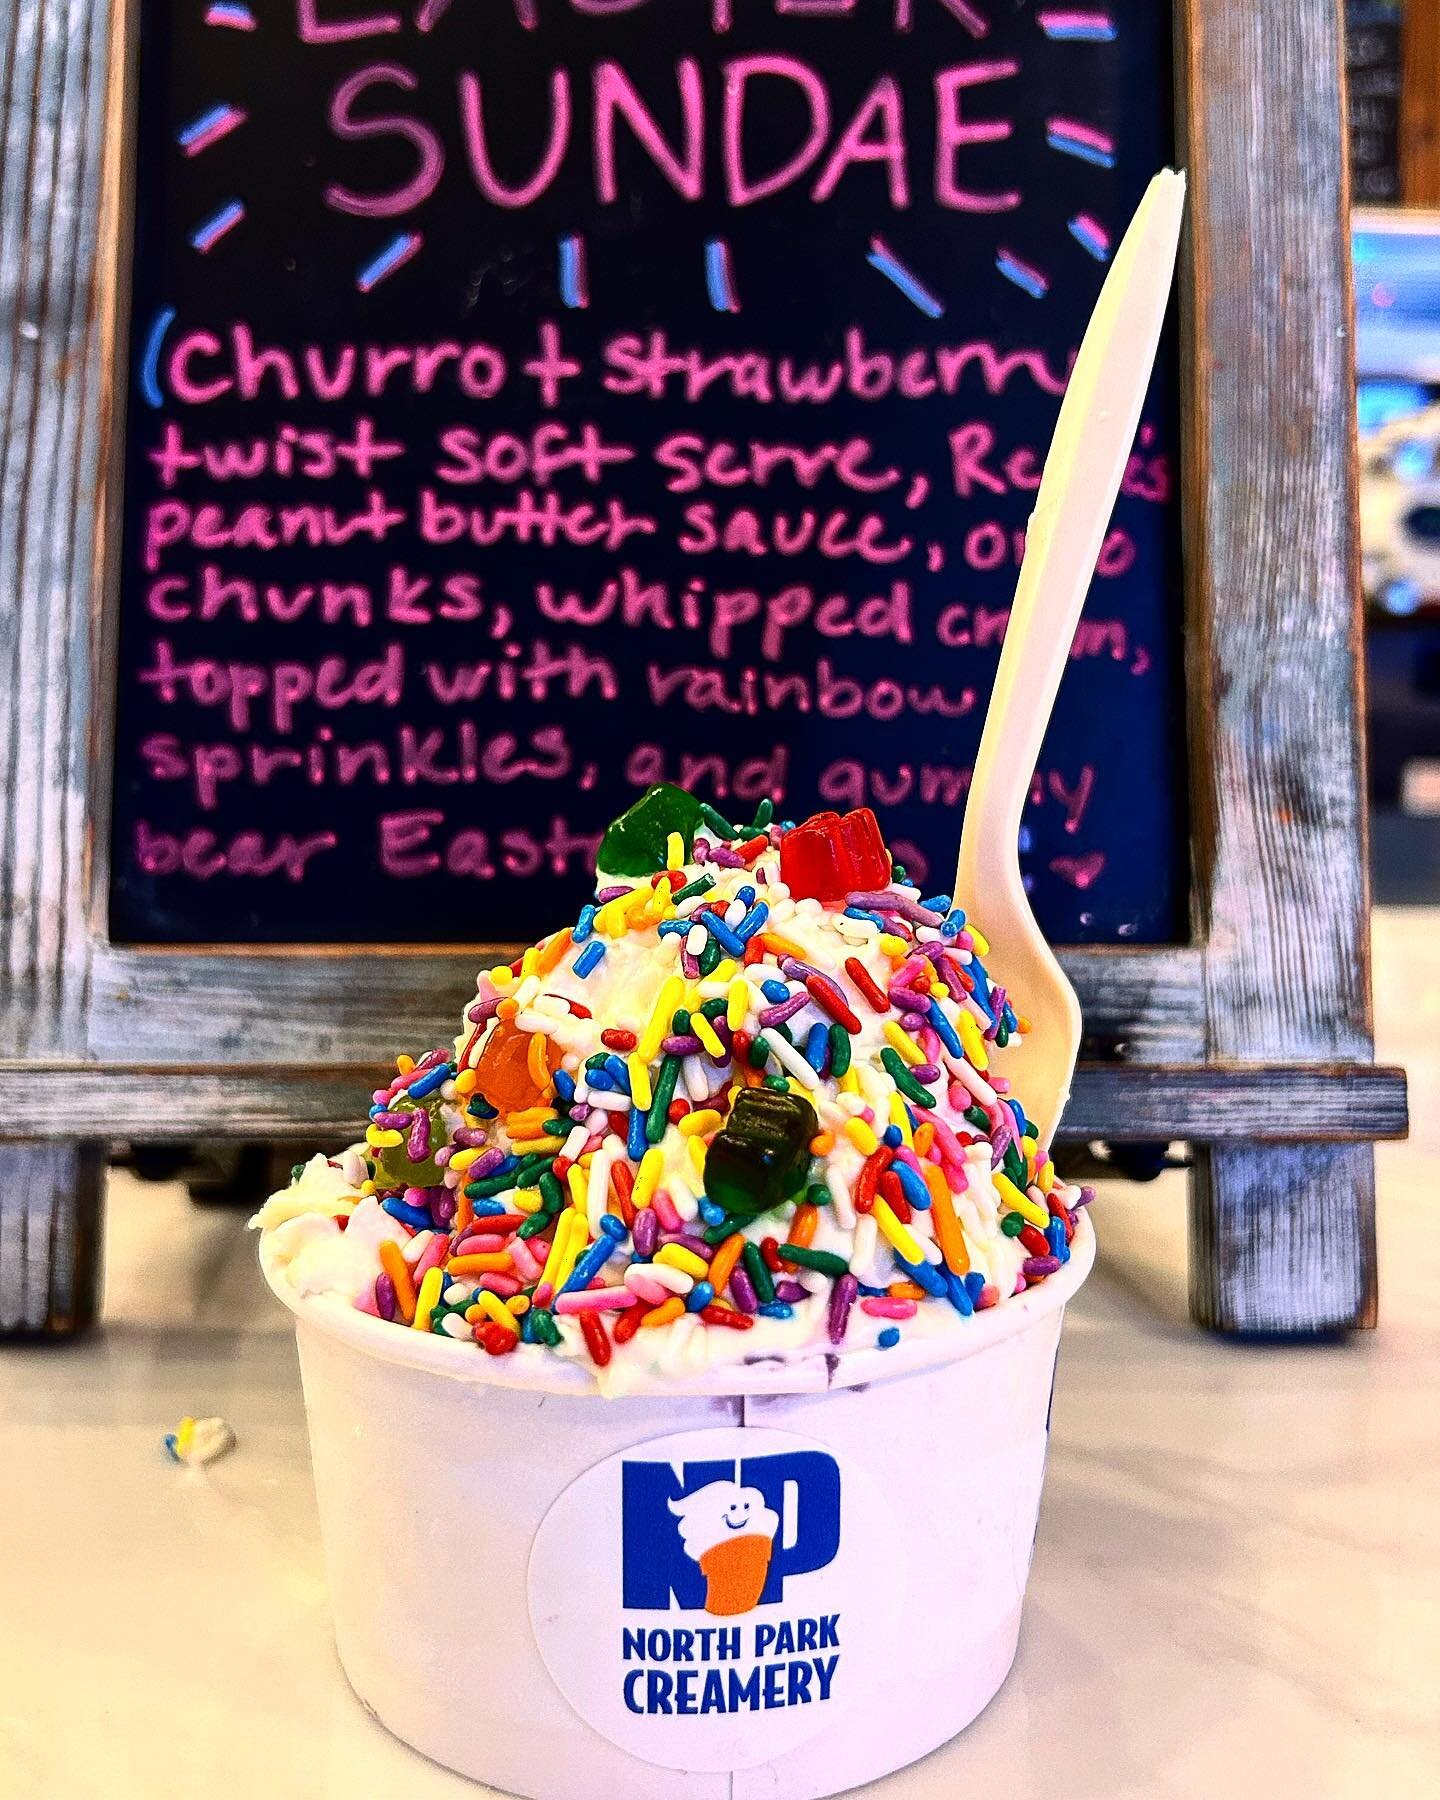 🚨New limited edition special🚨the Easter Sundae😹🐣. This delicious sundae includes: Organic Churro and strawberry 🍓 twist soft serve, Reese peanut butter 🥜 sauce, Oreos, and is topped with delicious organic whipped cream, sprinkles, and hidden🤫 